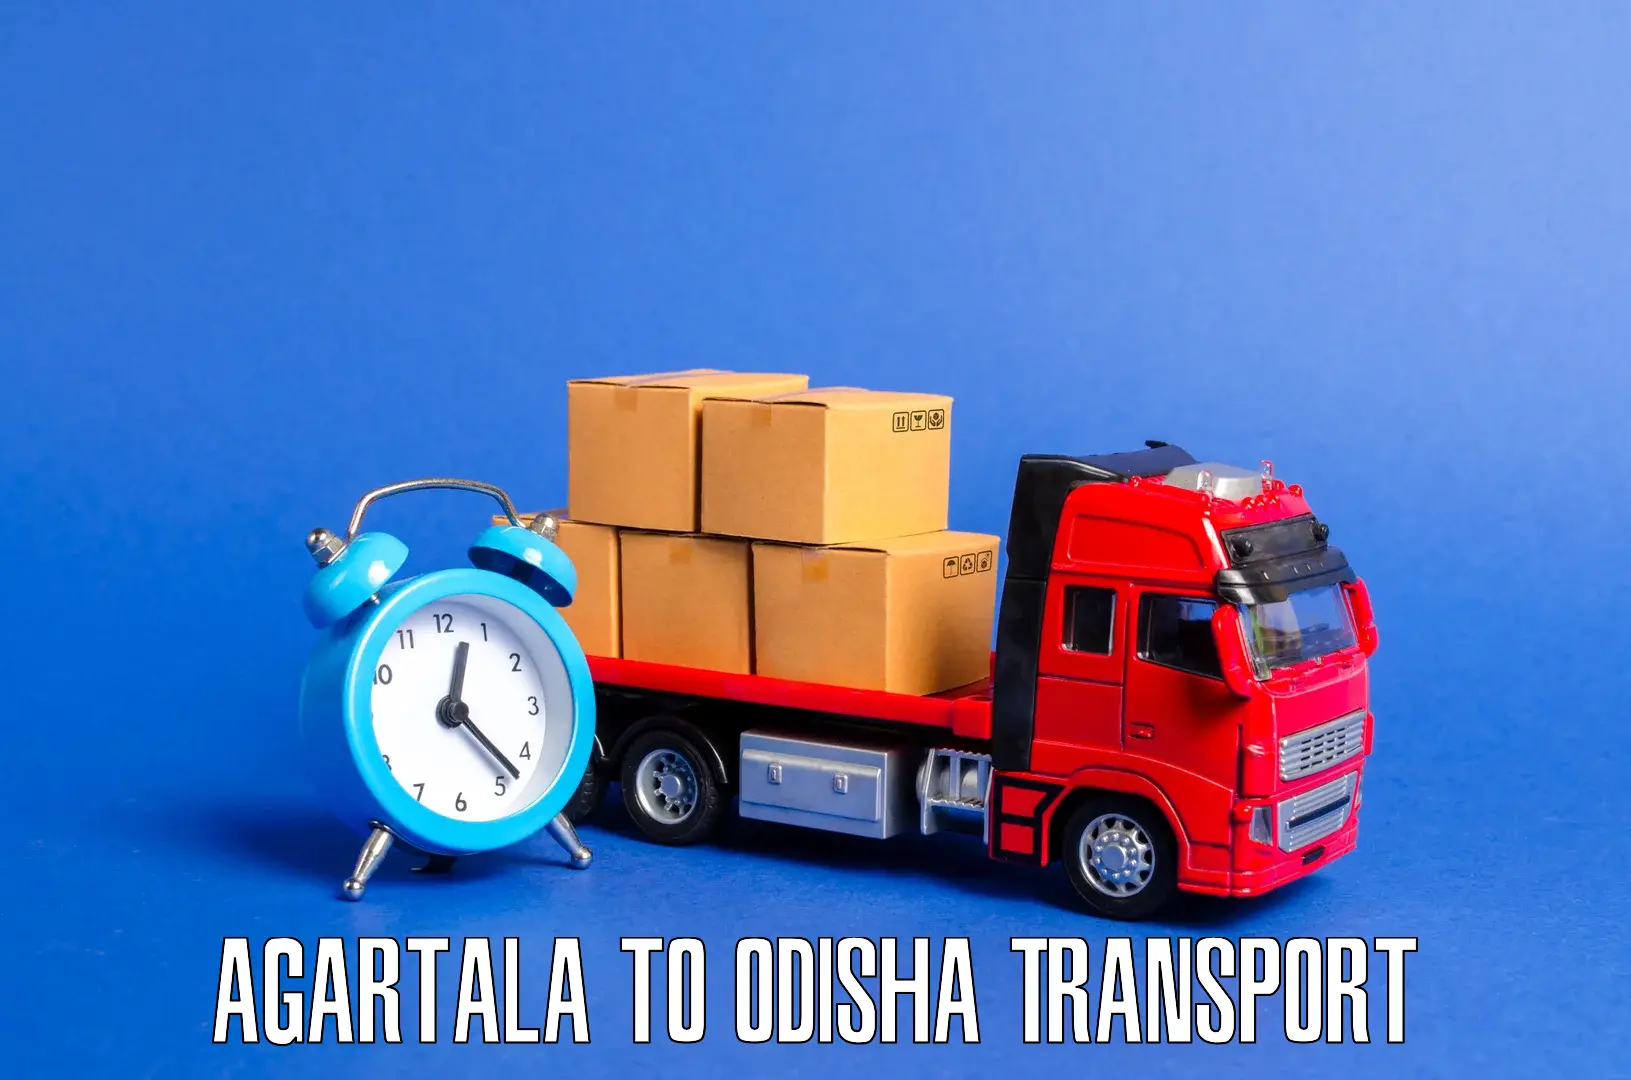 Container transport service Agartala to Paradip Port